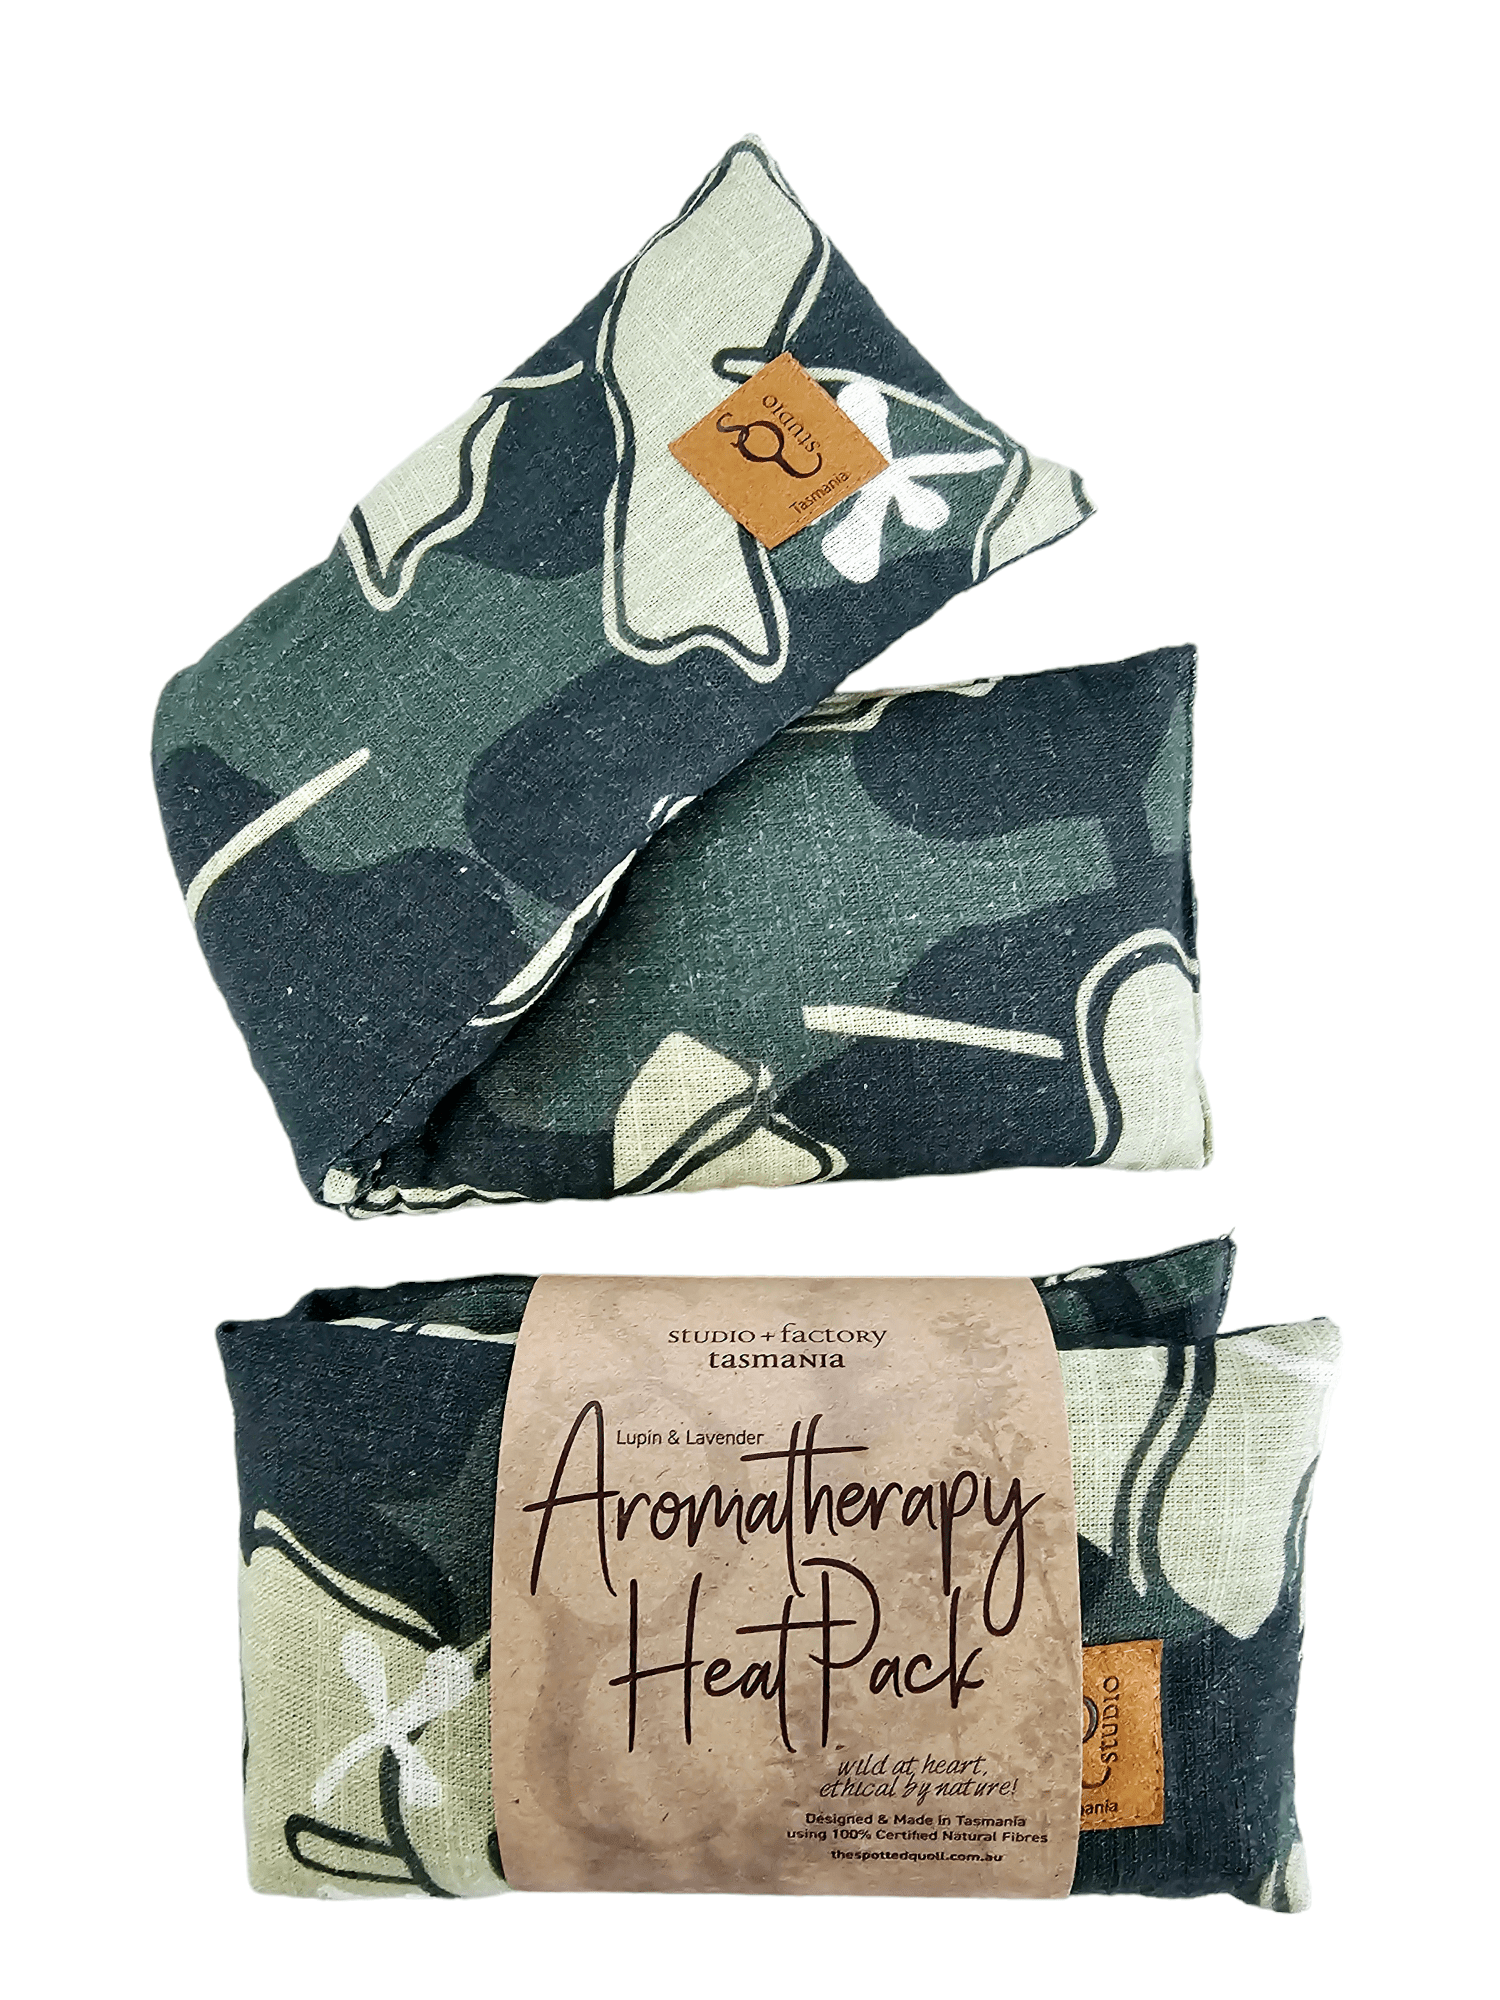 Aromatherapy Heat/Cold pack - Lupin & Lavender Heating Pads The Spotted Quoll Long Eucalyptus Risdonii 